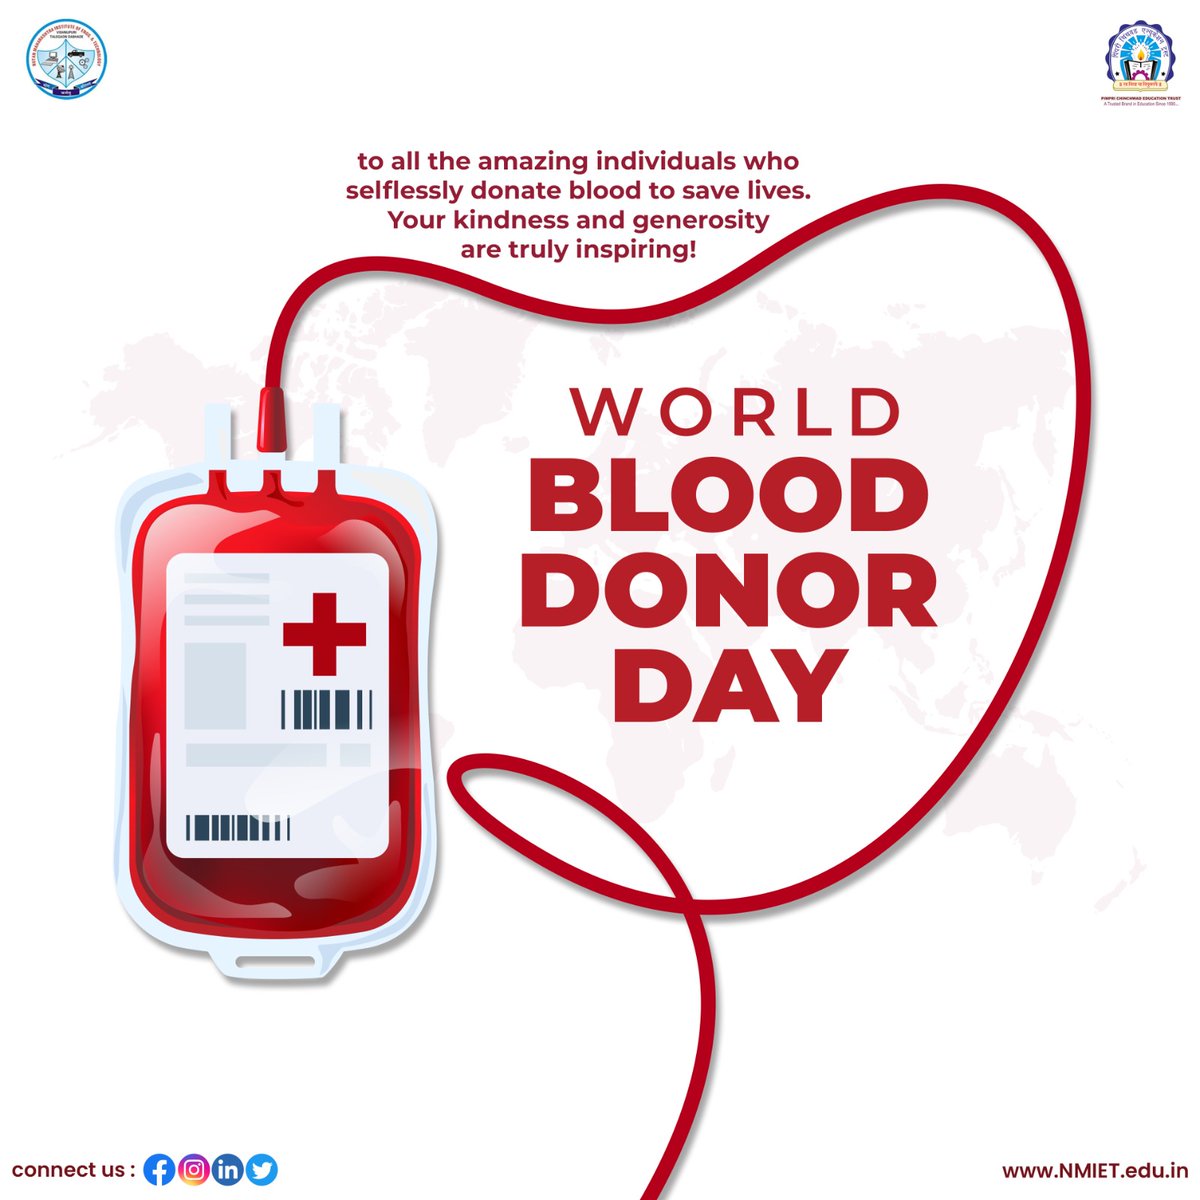 We honor the priceless gift of life that #blood #donors voluntarily contribute on #WorldBloodDonorDay2023

#PCET #NMIET #BloodDonation #worldblooddonorday #donateblood #savelives #giveplasma #BloodDonationCamp #blooddonation2023 #GiveBloodSaveLives #BeAHeroDonateBlood